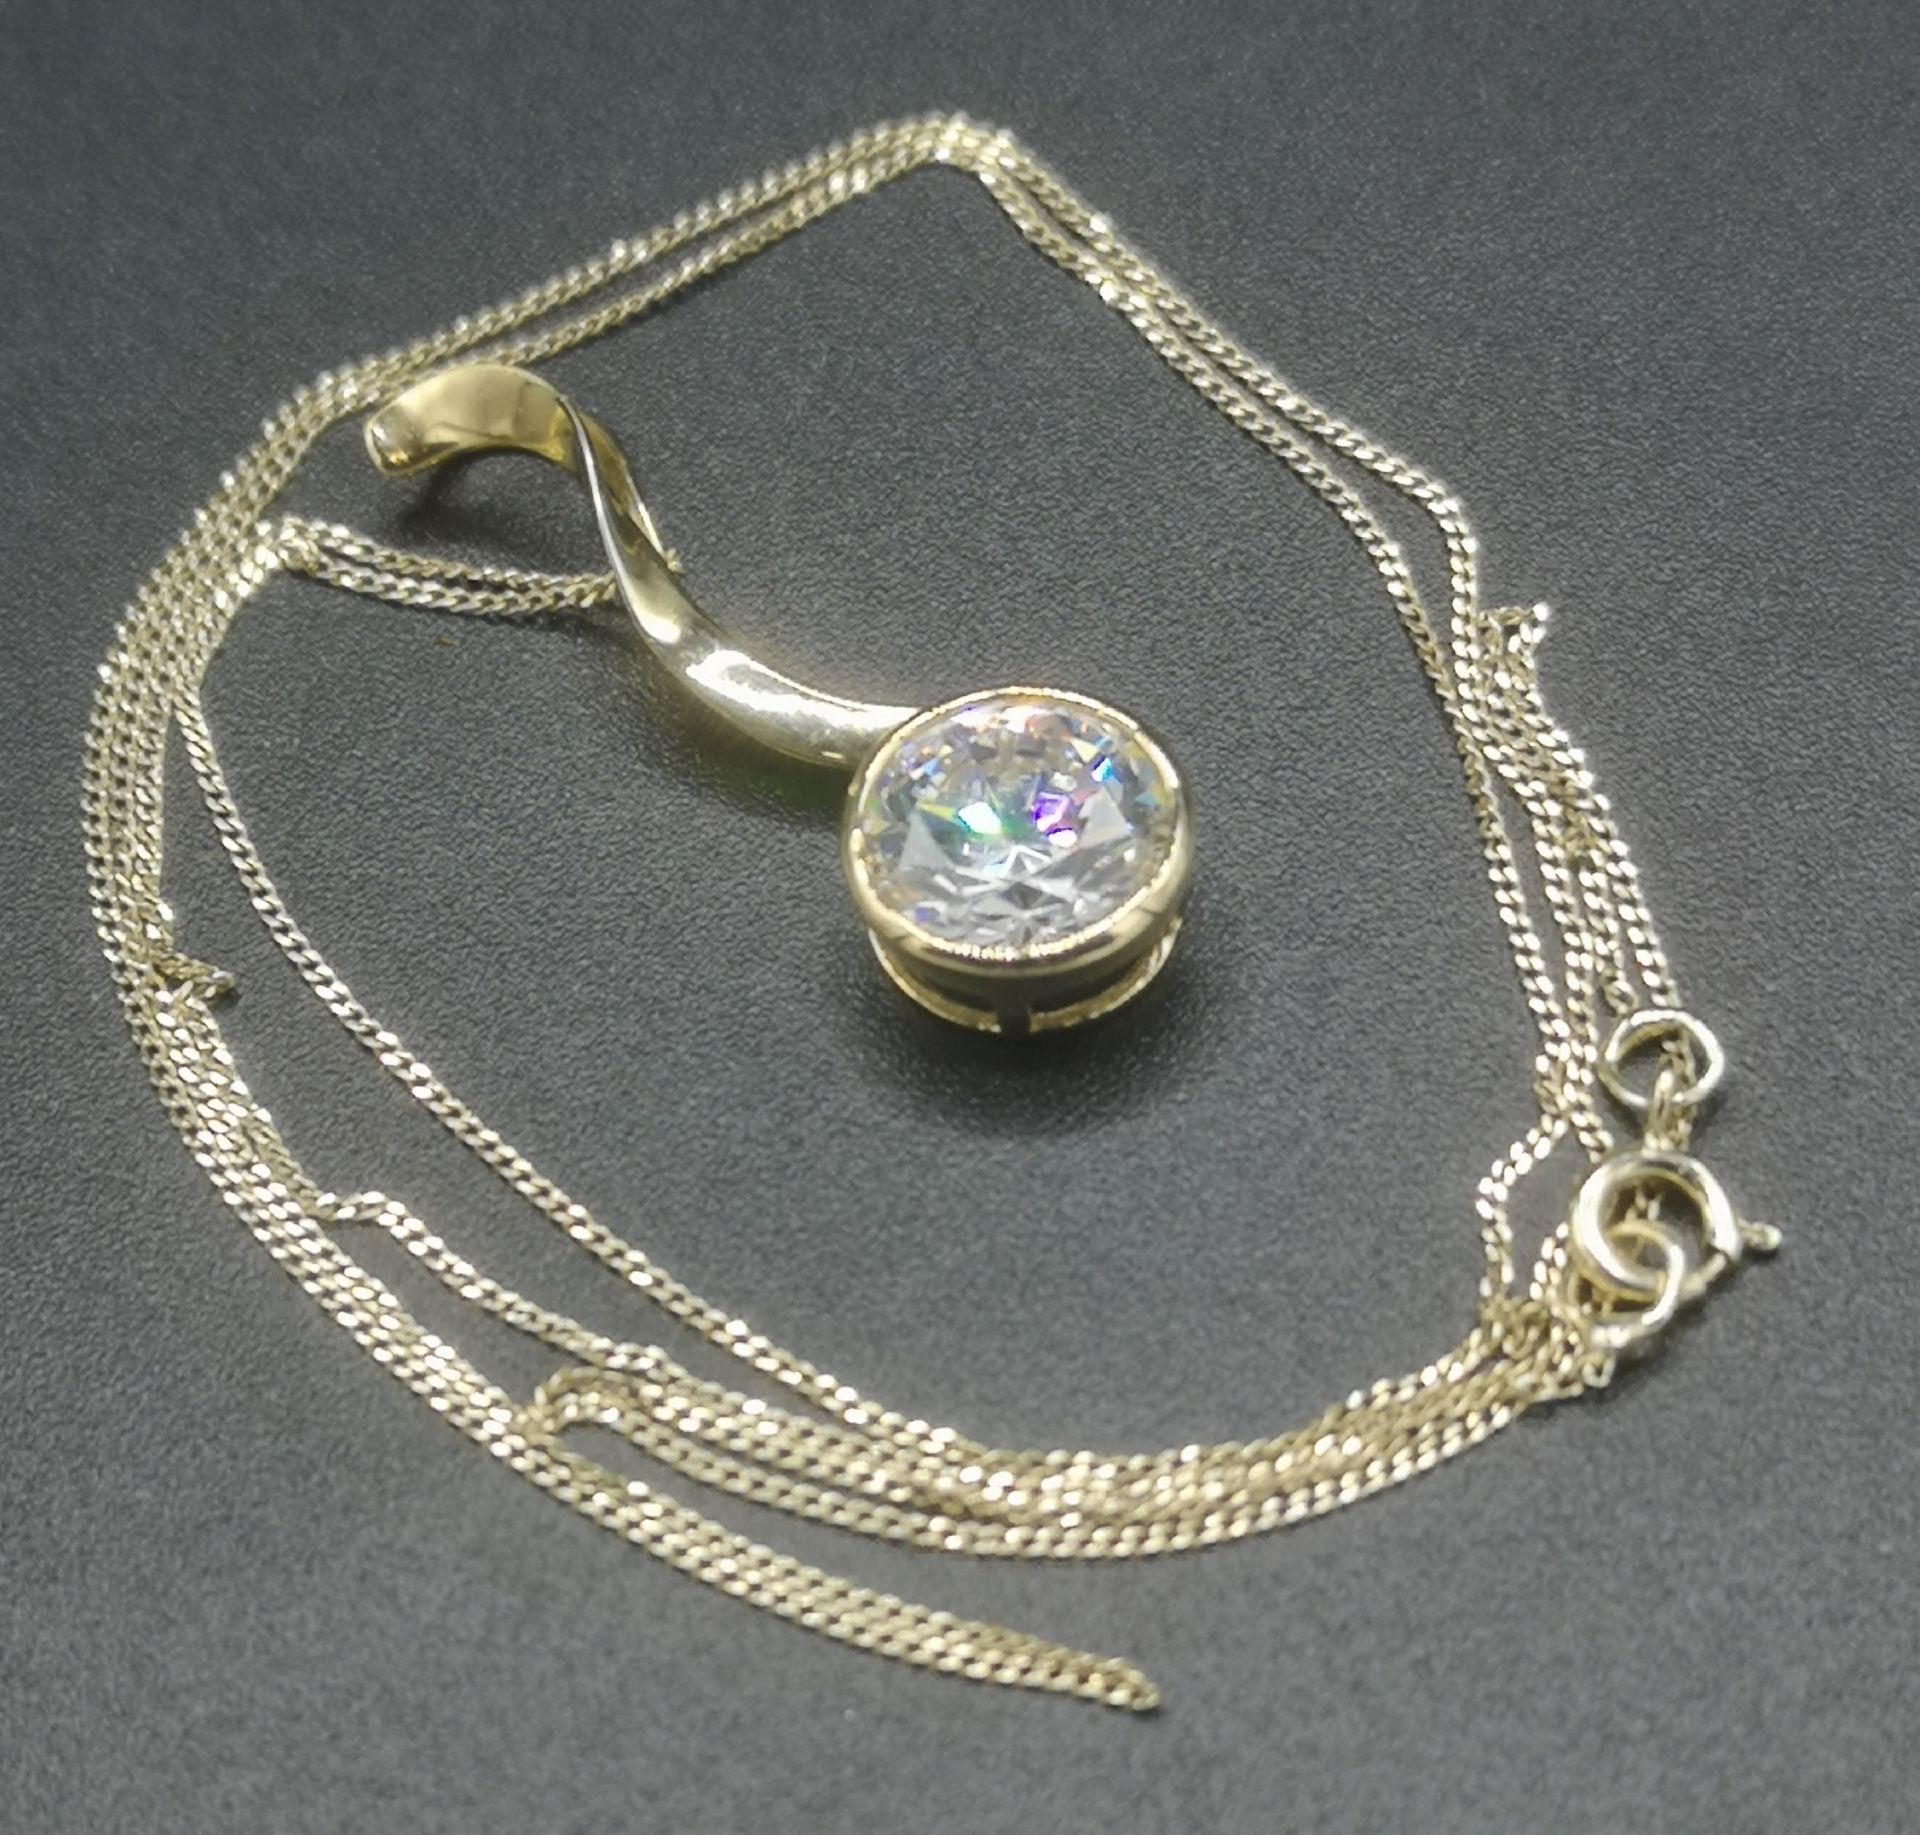 9ct gold necklace with 14ct gold pendant - Image 4 of 4